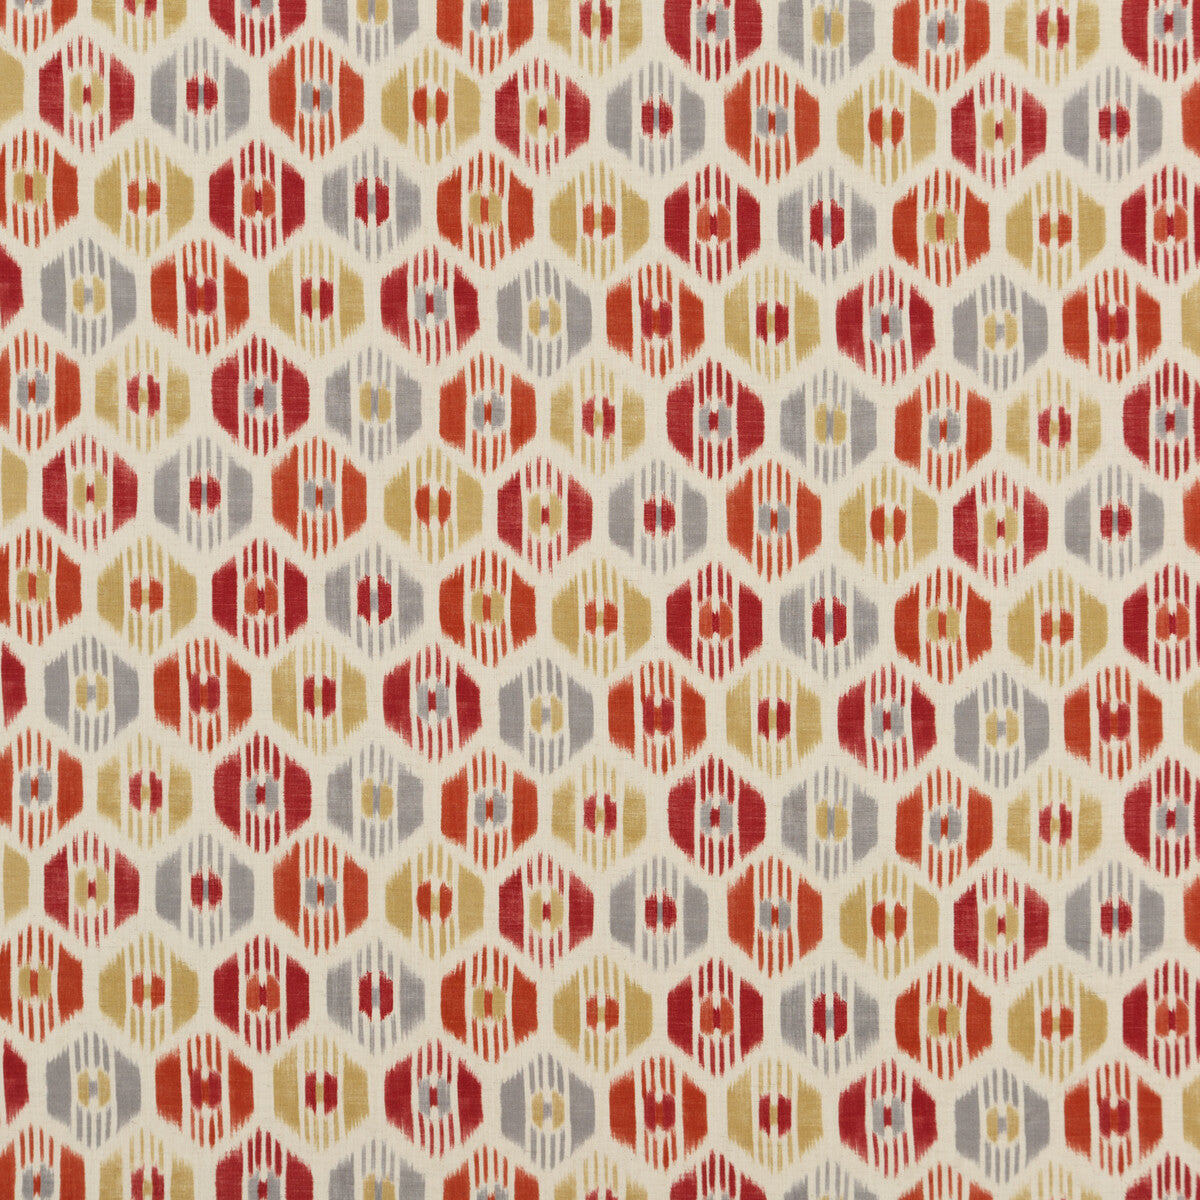 Caribana fabric in spice color - pattern PP50433.4.0 - by Baker Lifestyle in the Carnival collection